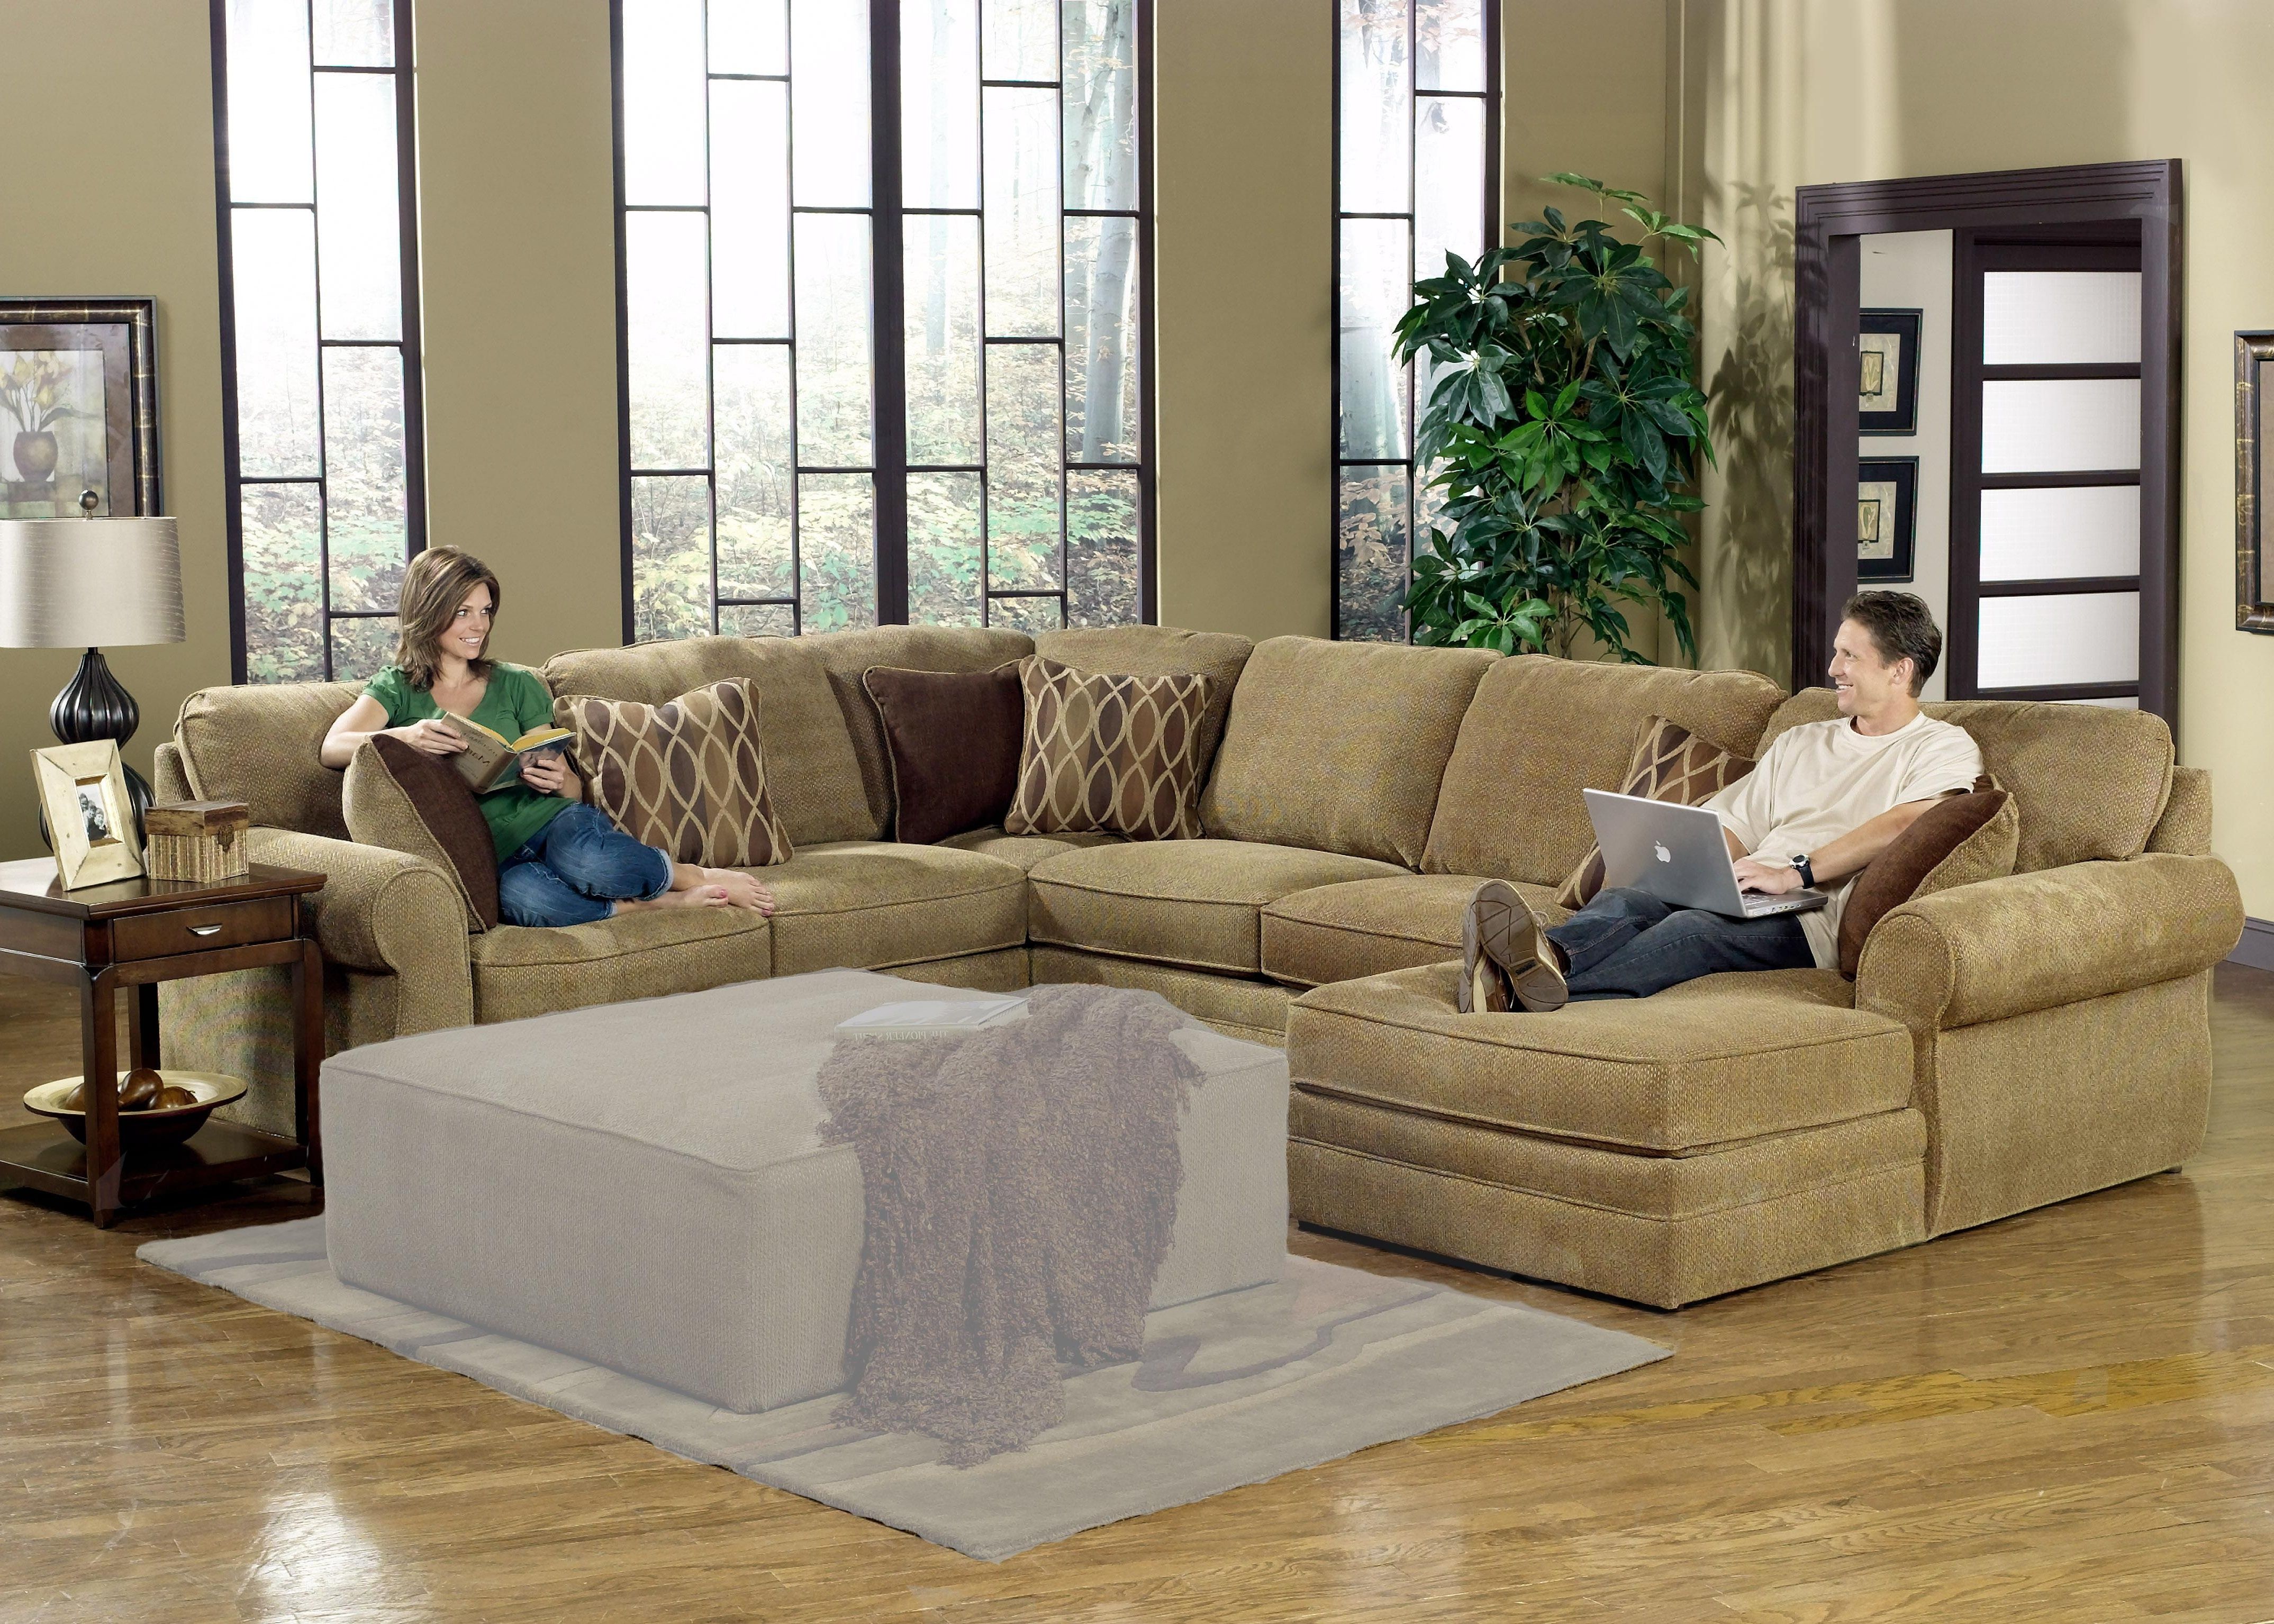 Most Recently Released Big U Shaped Sectionals For Sectional Sofa Design: Adorable Large U Shaped Sectional Sofa U (View 9 of 20)